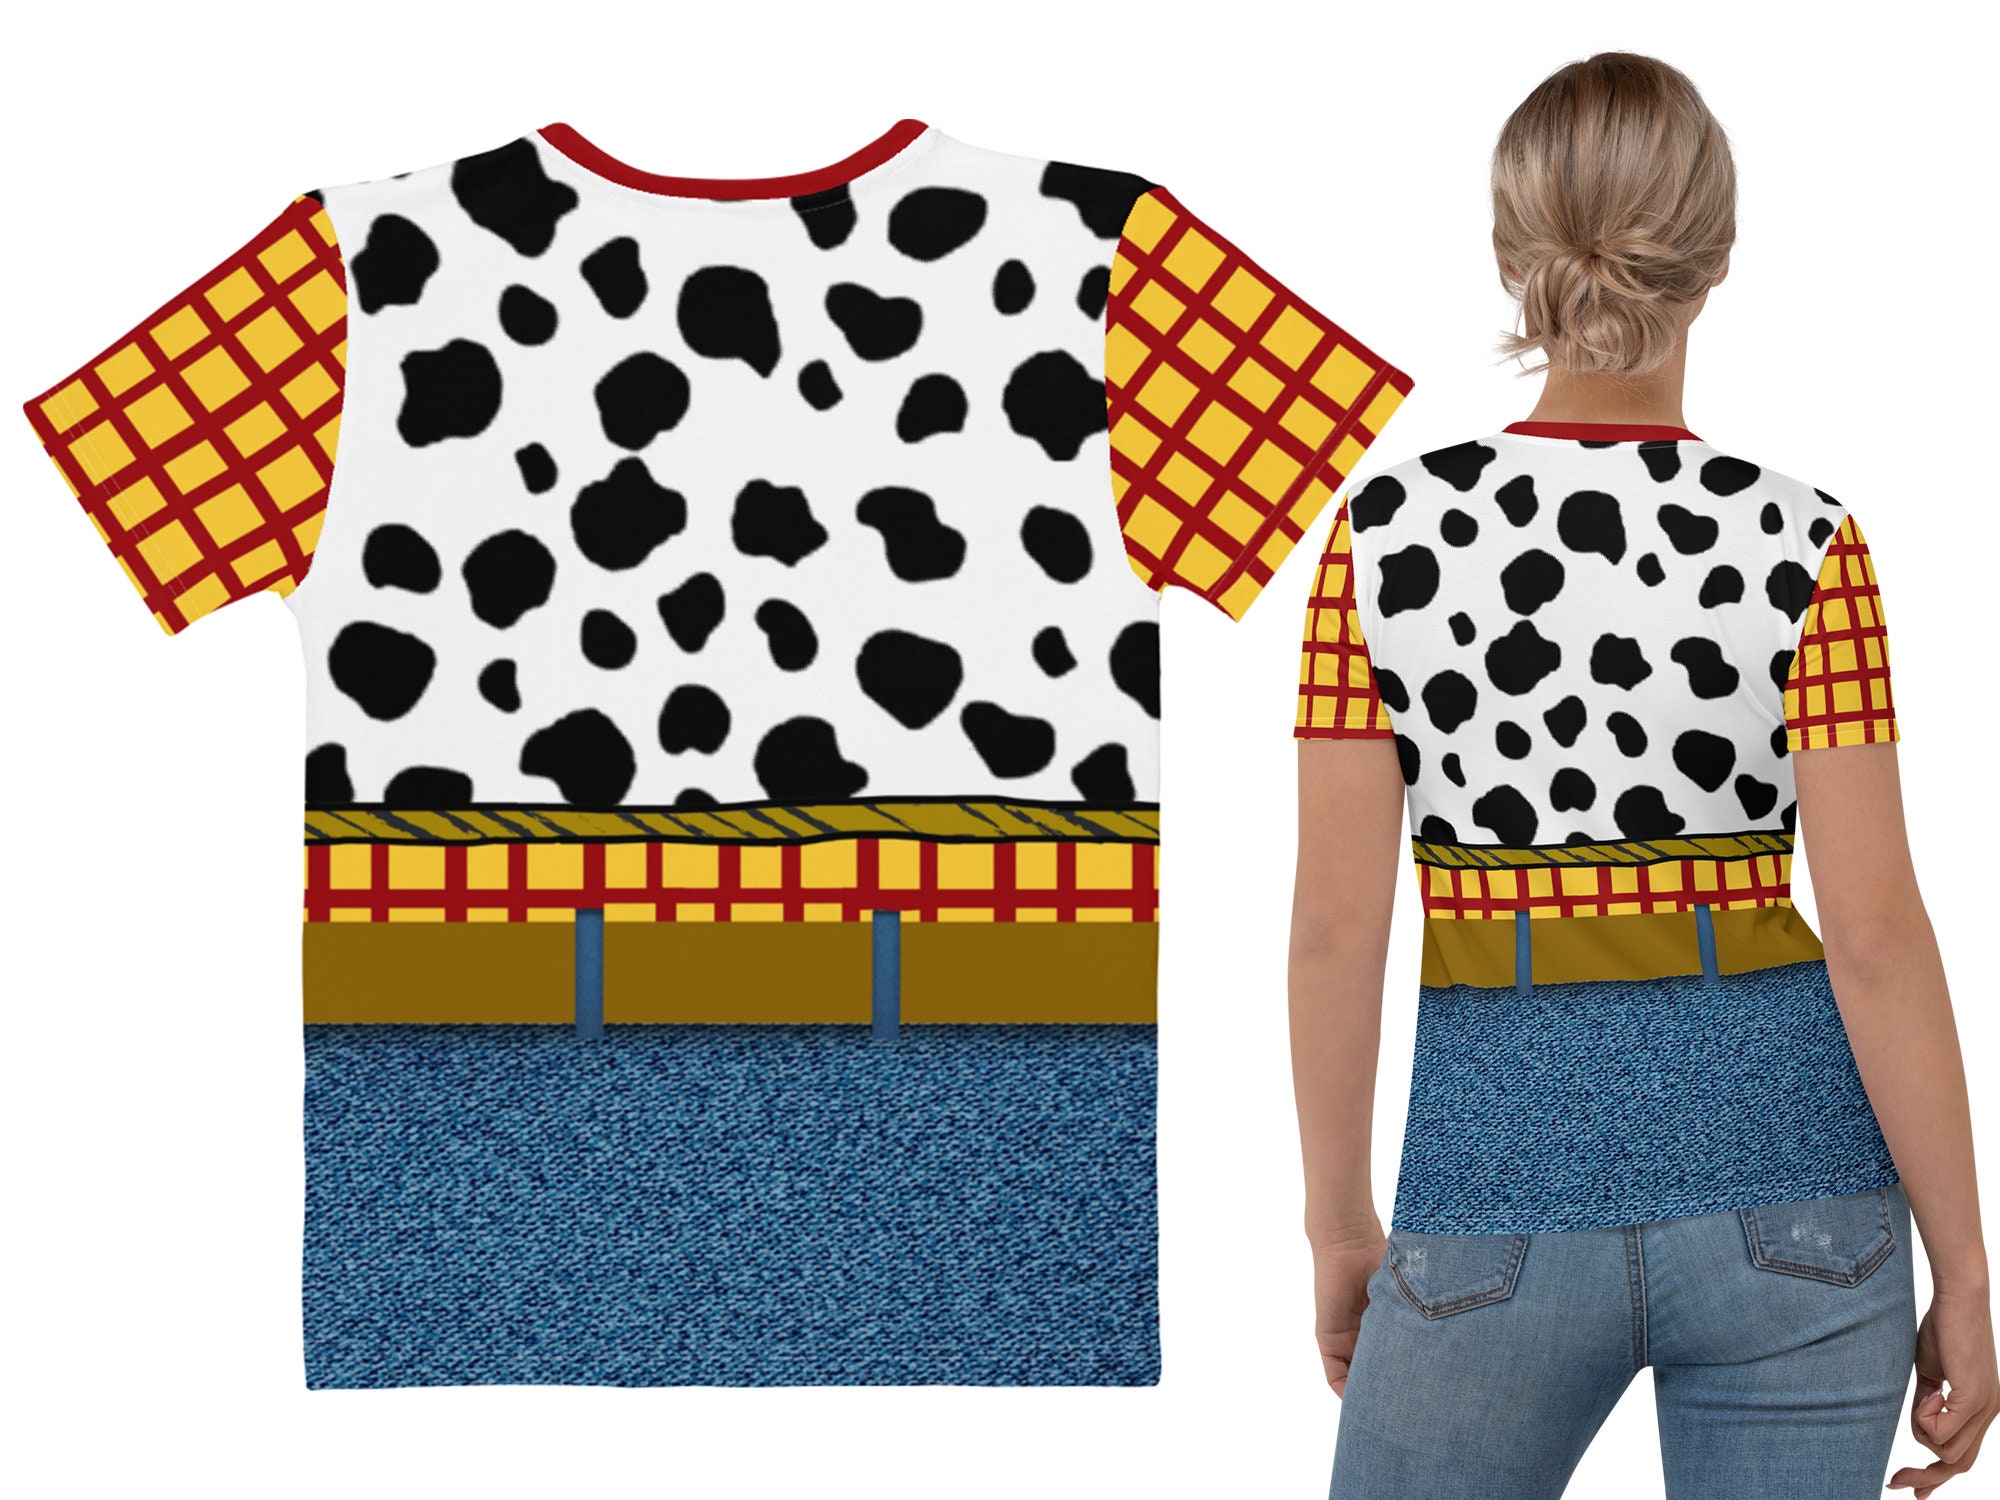 Woody Toy Story T-shirt Woman Cowboy Halloween Costume Cosplay - Etsy